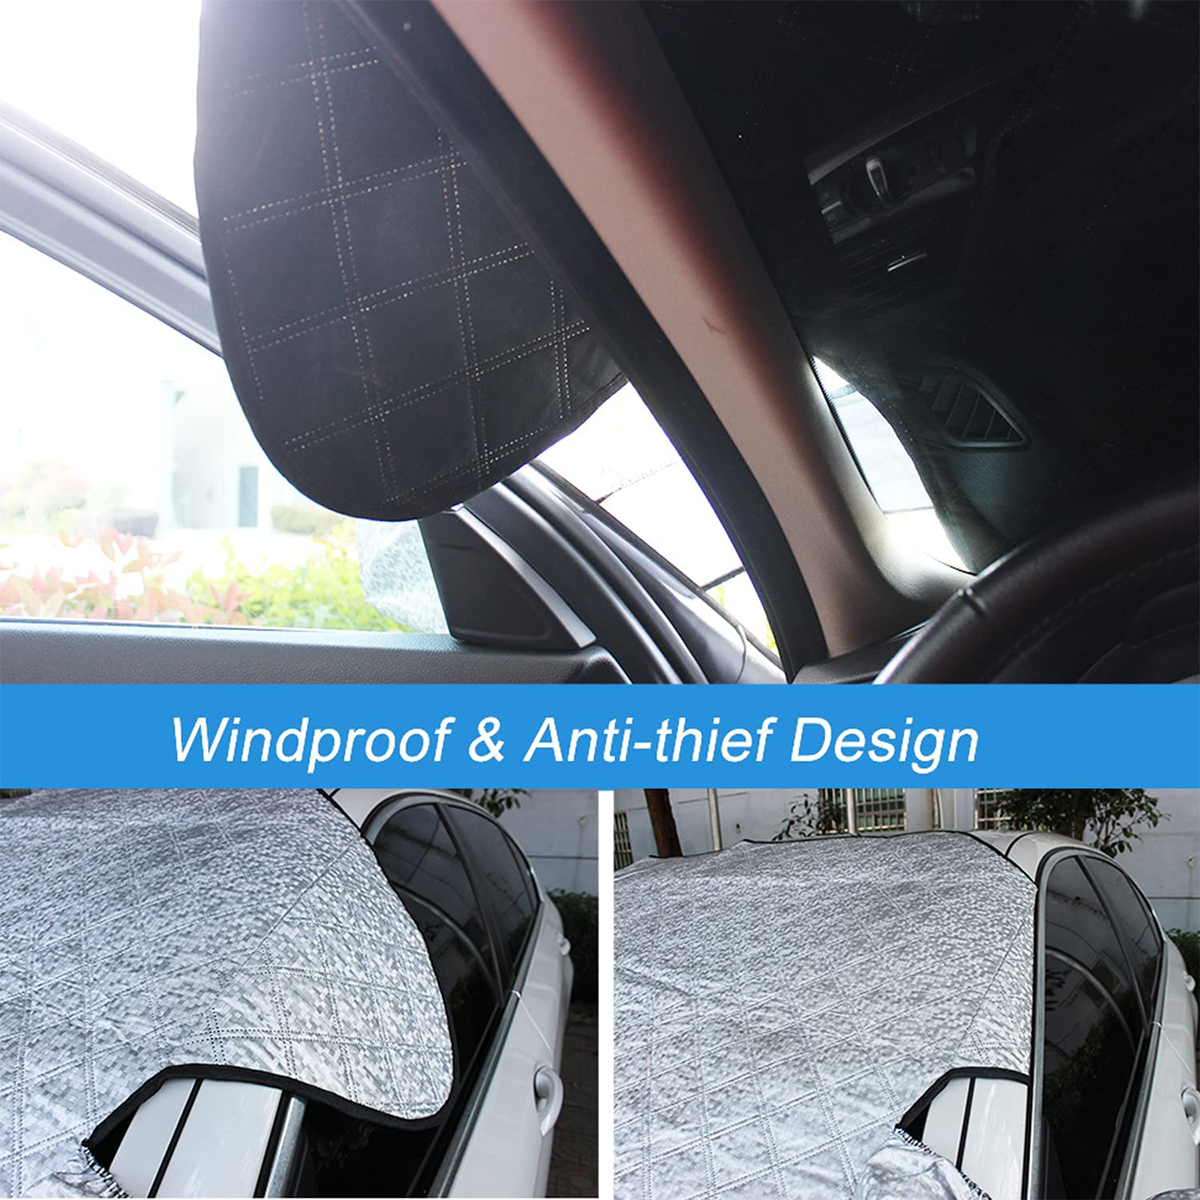 Windshield Cover for Ice and Snow, Custom fit for car, Magnetic Windshield Cover, Water, Heat & Sag-Proof Car Windshield Snow Cover, Mirror Protector Windproof Sunshade Cover